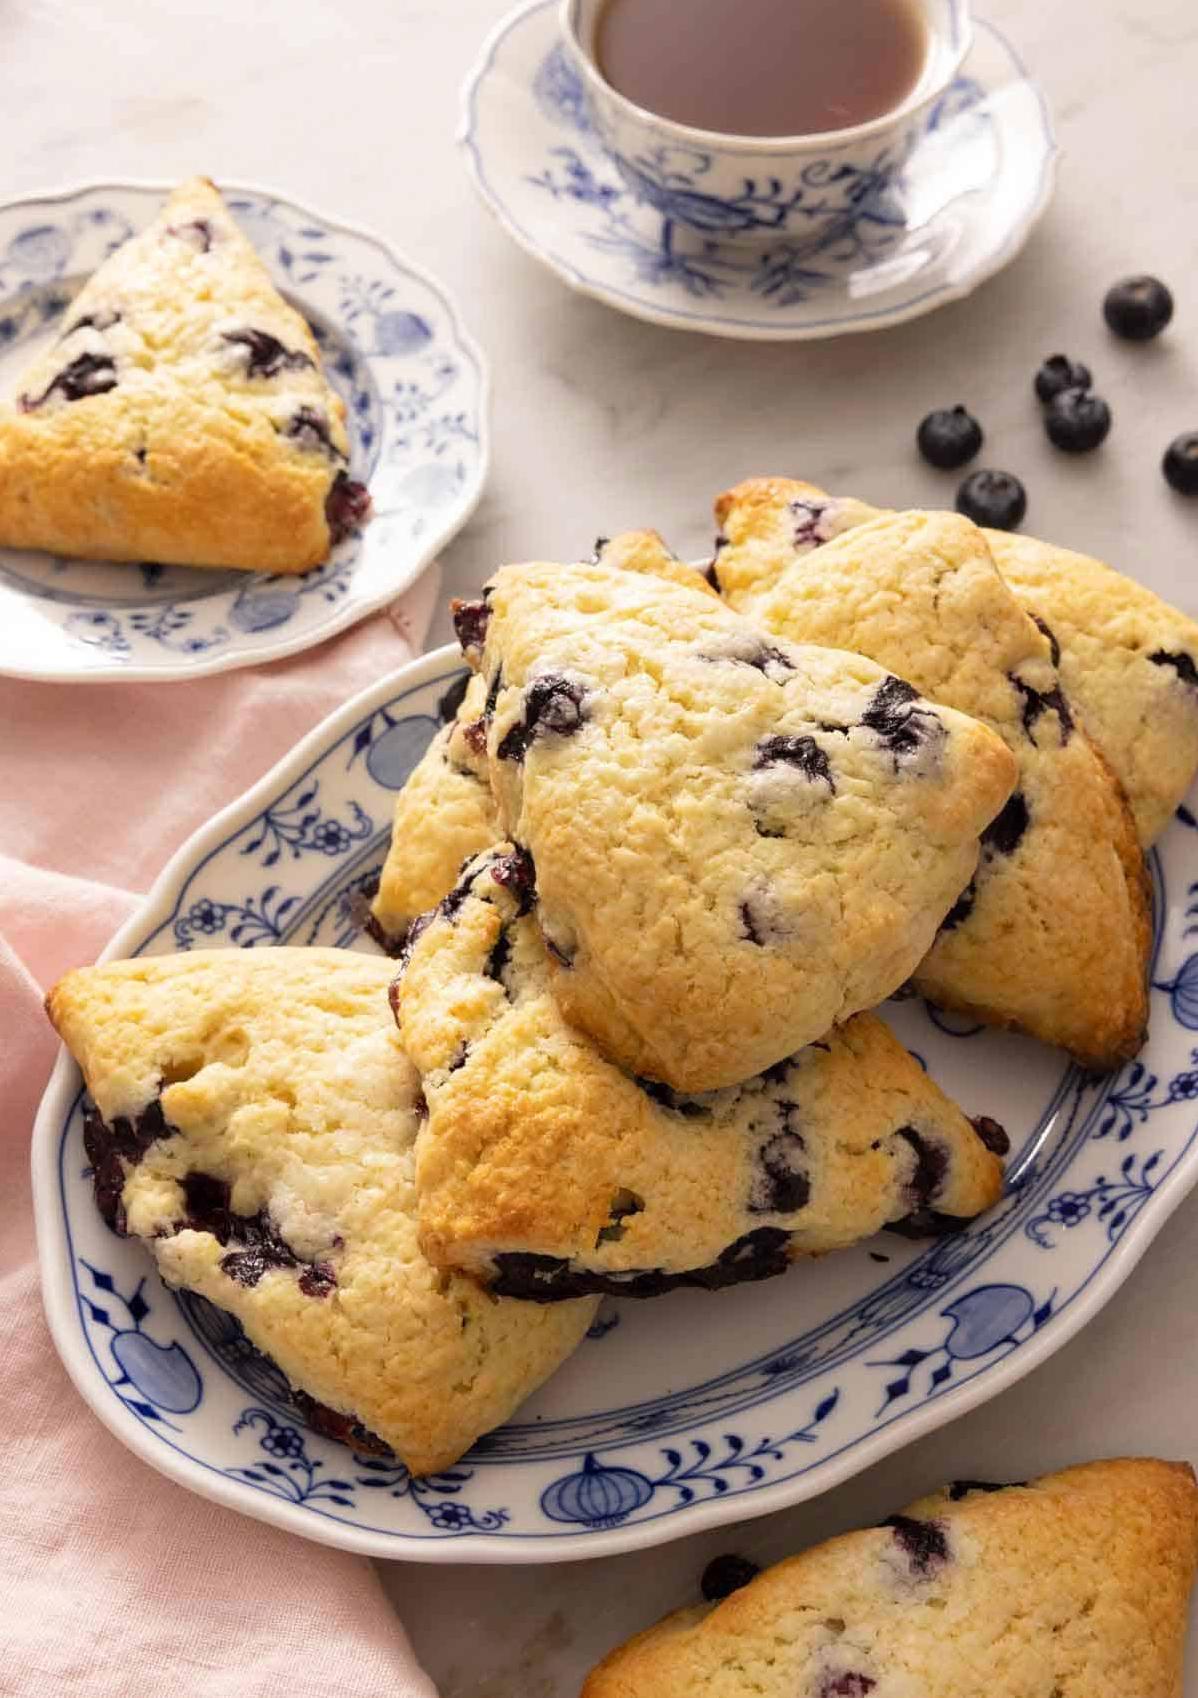  The combination of blueberries and scone makes my mouth water!